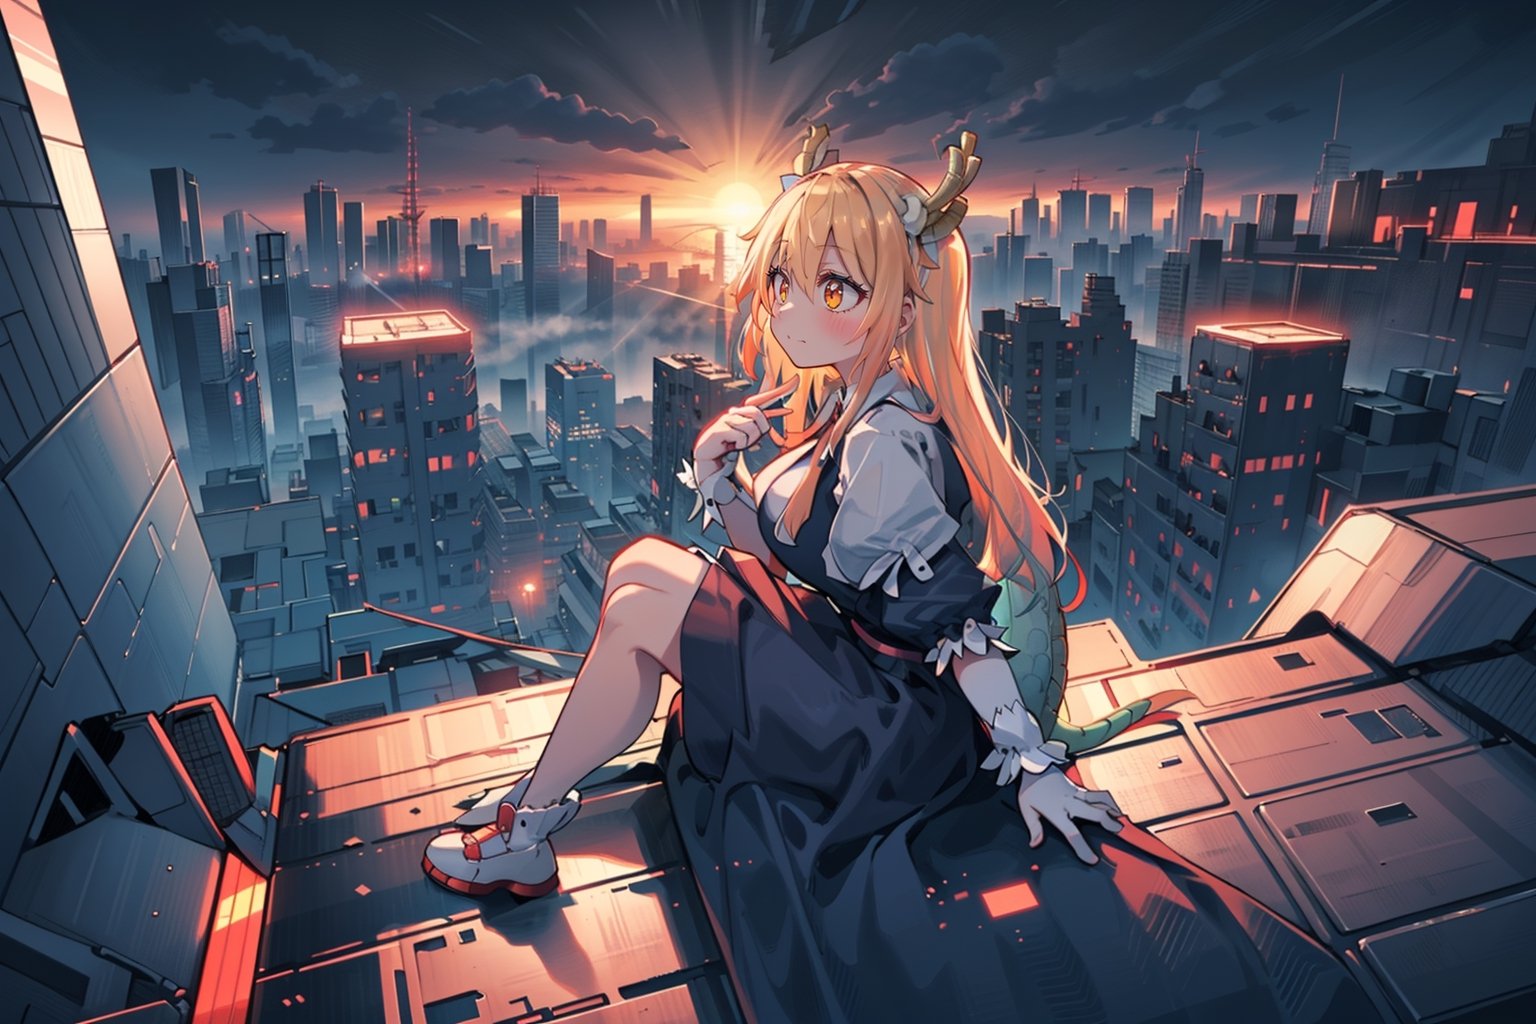 1 girl perched on a futuristic rooftop, gazing at a holographic city skyline, solitude, reflection, cityscape, futurism, contemplation, rooftop lair, wide-angle lens, twilight, 24mm focal distance, cyberpunk landscape, by SilverWhiskers, tohru (maidragon), 4k, beautiful, masterpiece